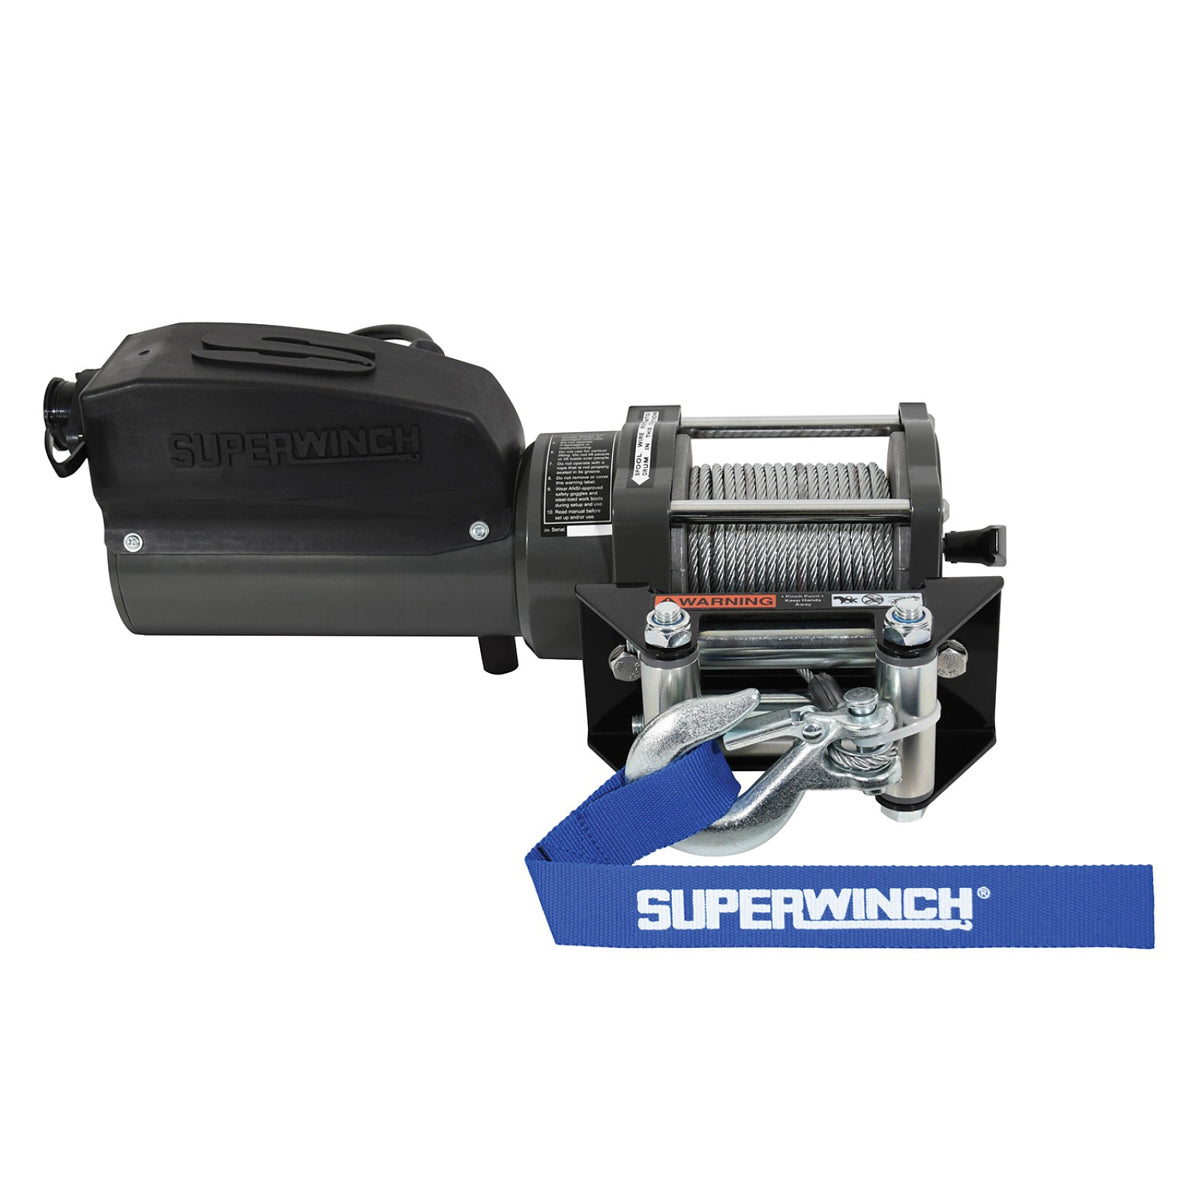 Superwinch 1500lb Winch 1.1HP 120V 1/8in x 35ft Wire Rope SUP1715001